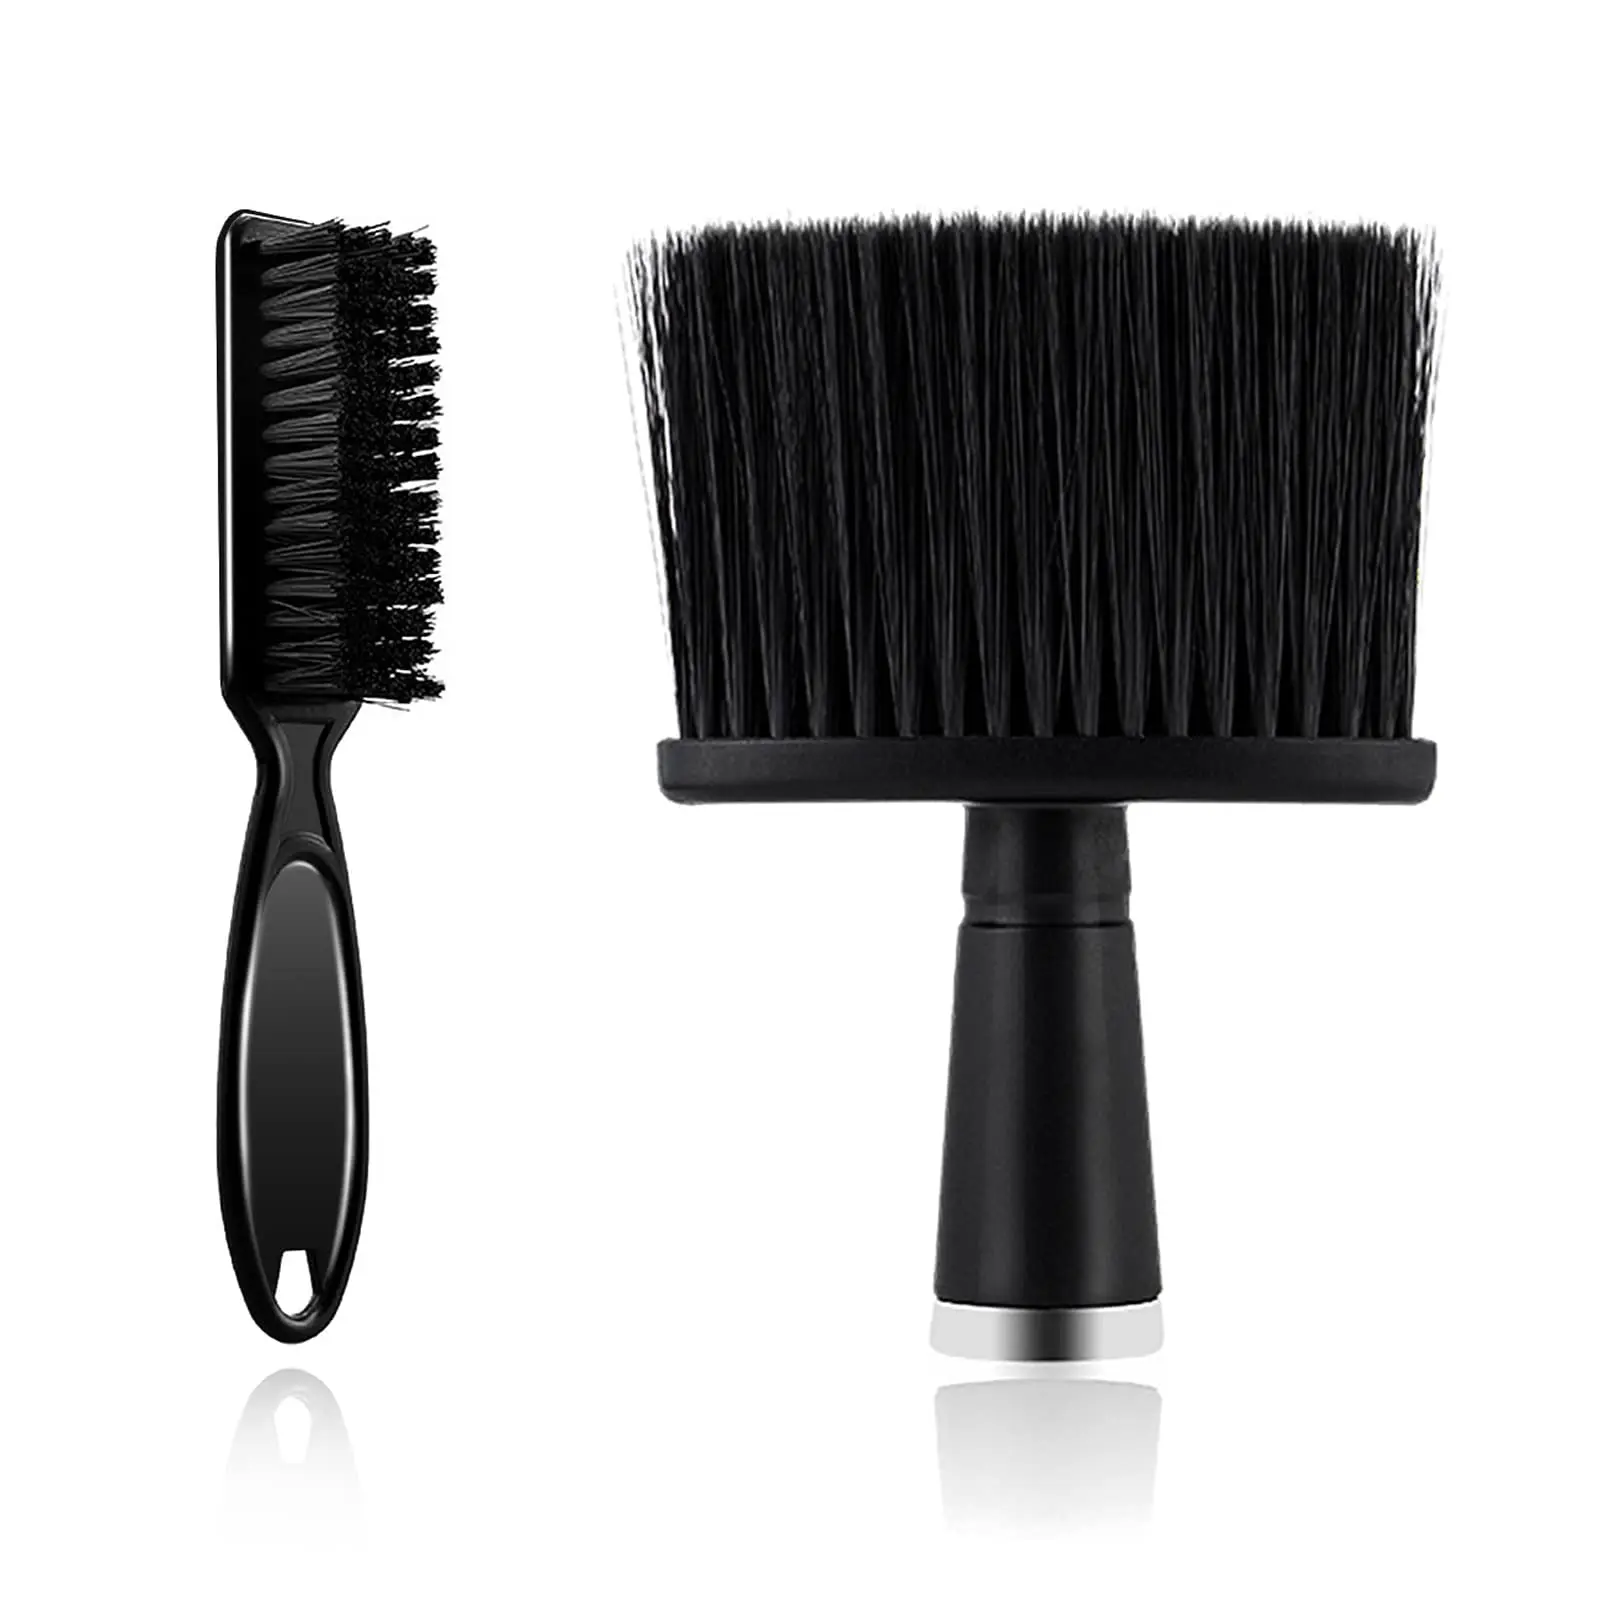 2PCS/Set Barber Brush Hairdresser Blade Clean Brush Neck Duster Brushes Clipper Cleaning Brush Styling Brush Tool air blowing ball gadgets dust blower mini pump cleaner for camera lens cleaning mobile phone tablet circuits clean repair tool